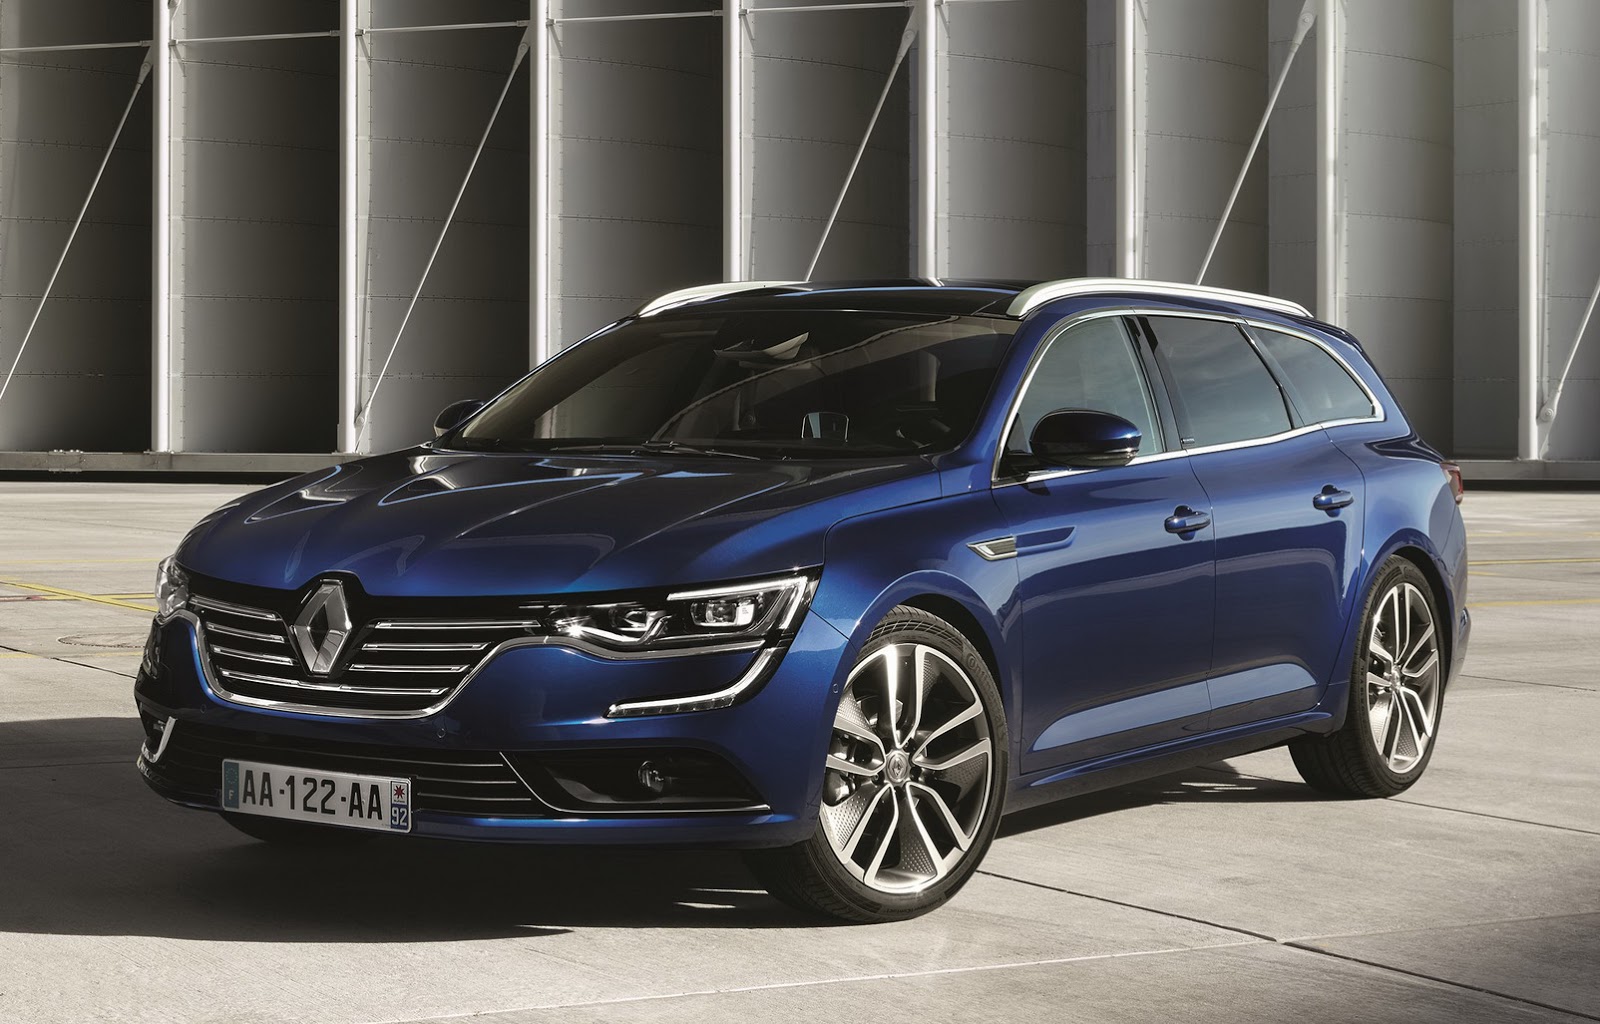 New Renault Talisman Estate – First Official Photos And Details